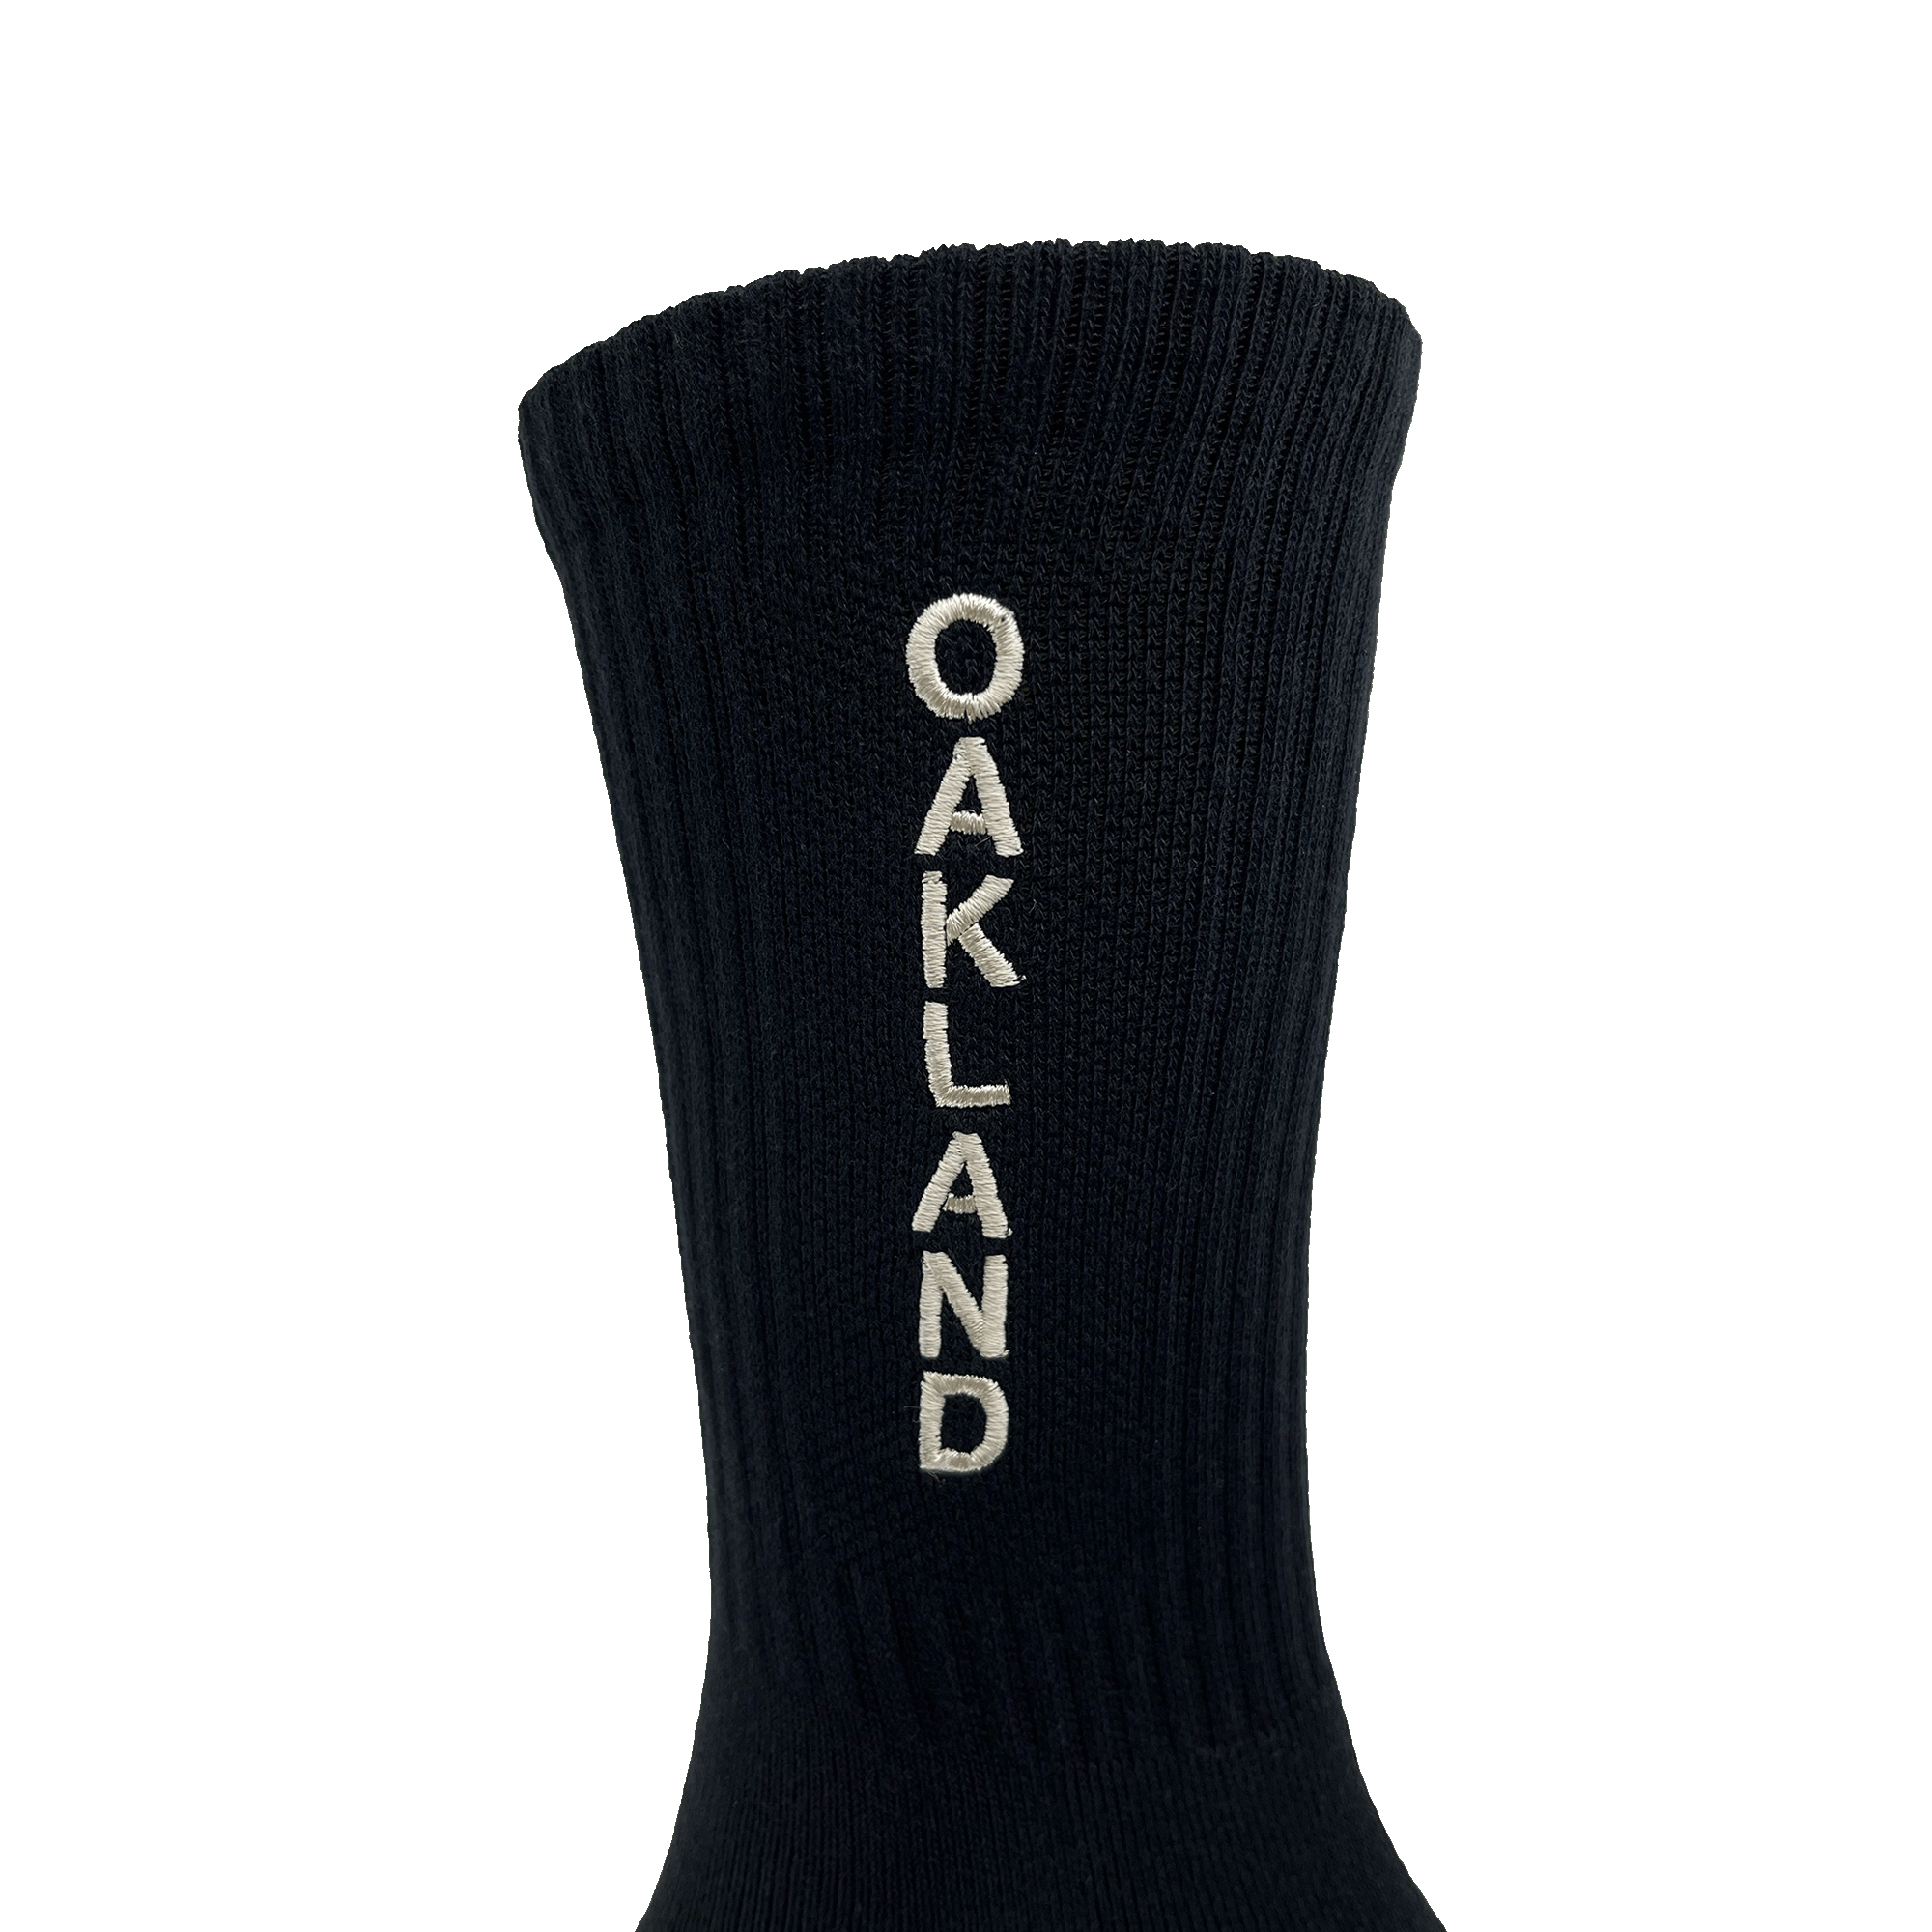 Close-up of embroidered white OAKLAND wordmark on the side of black crew sock.